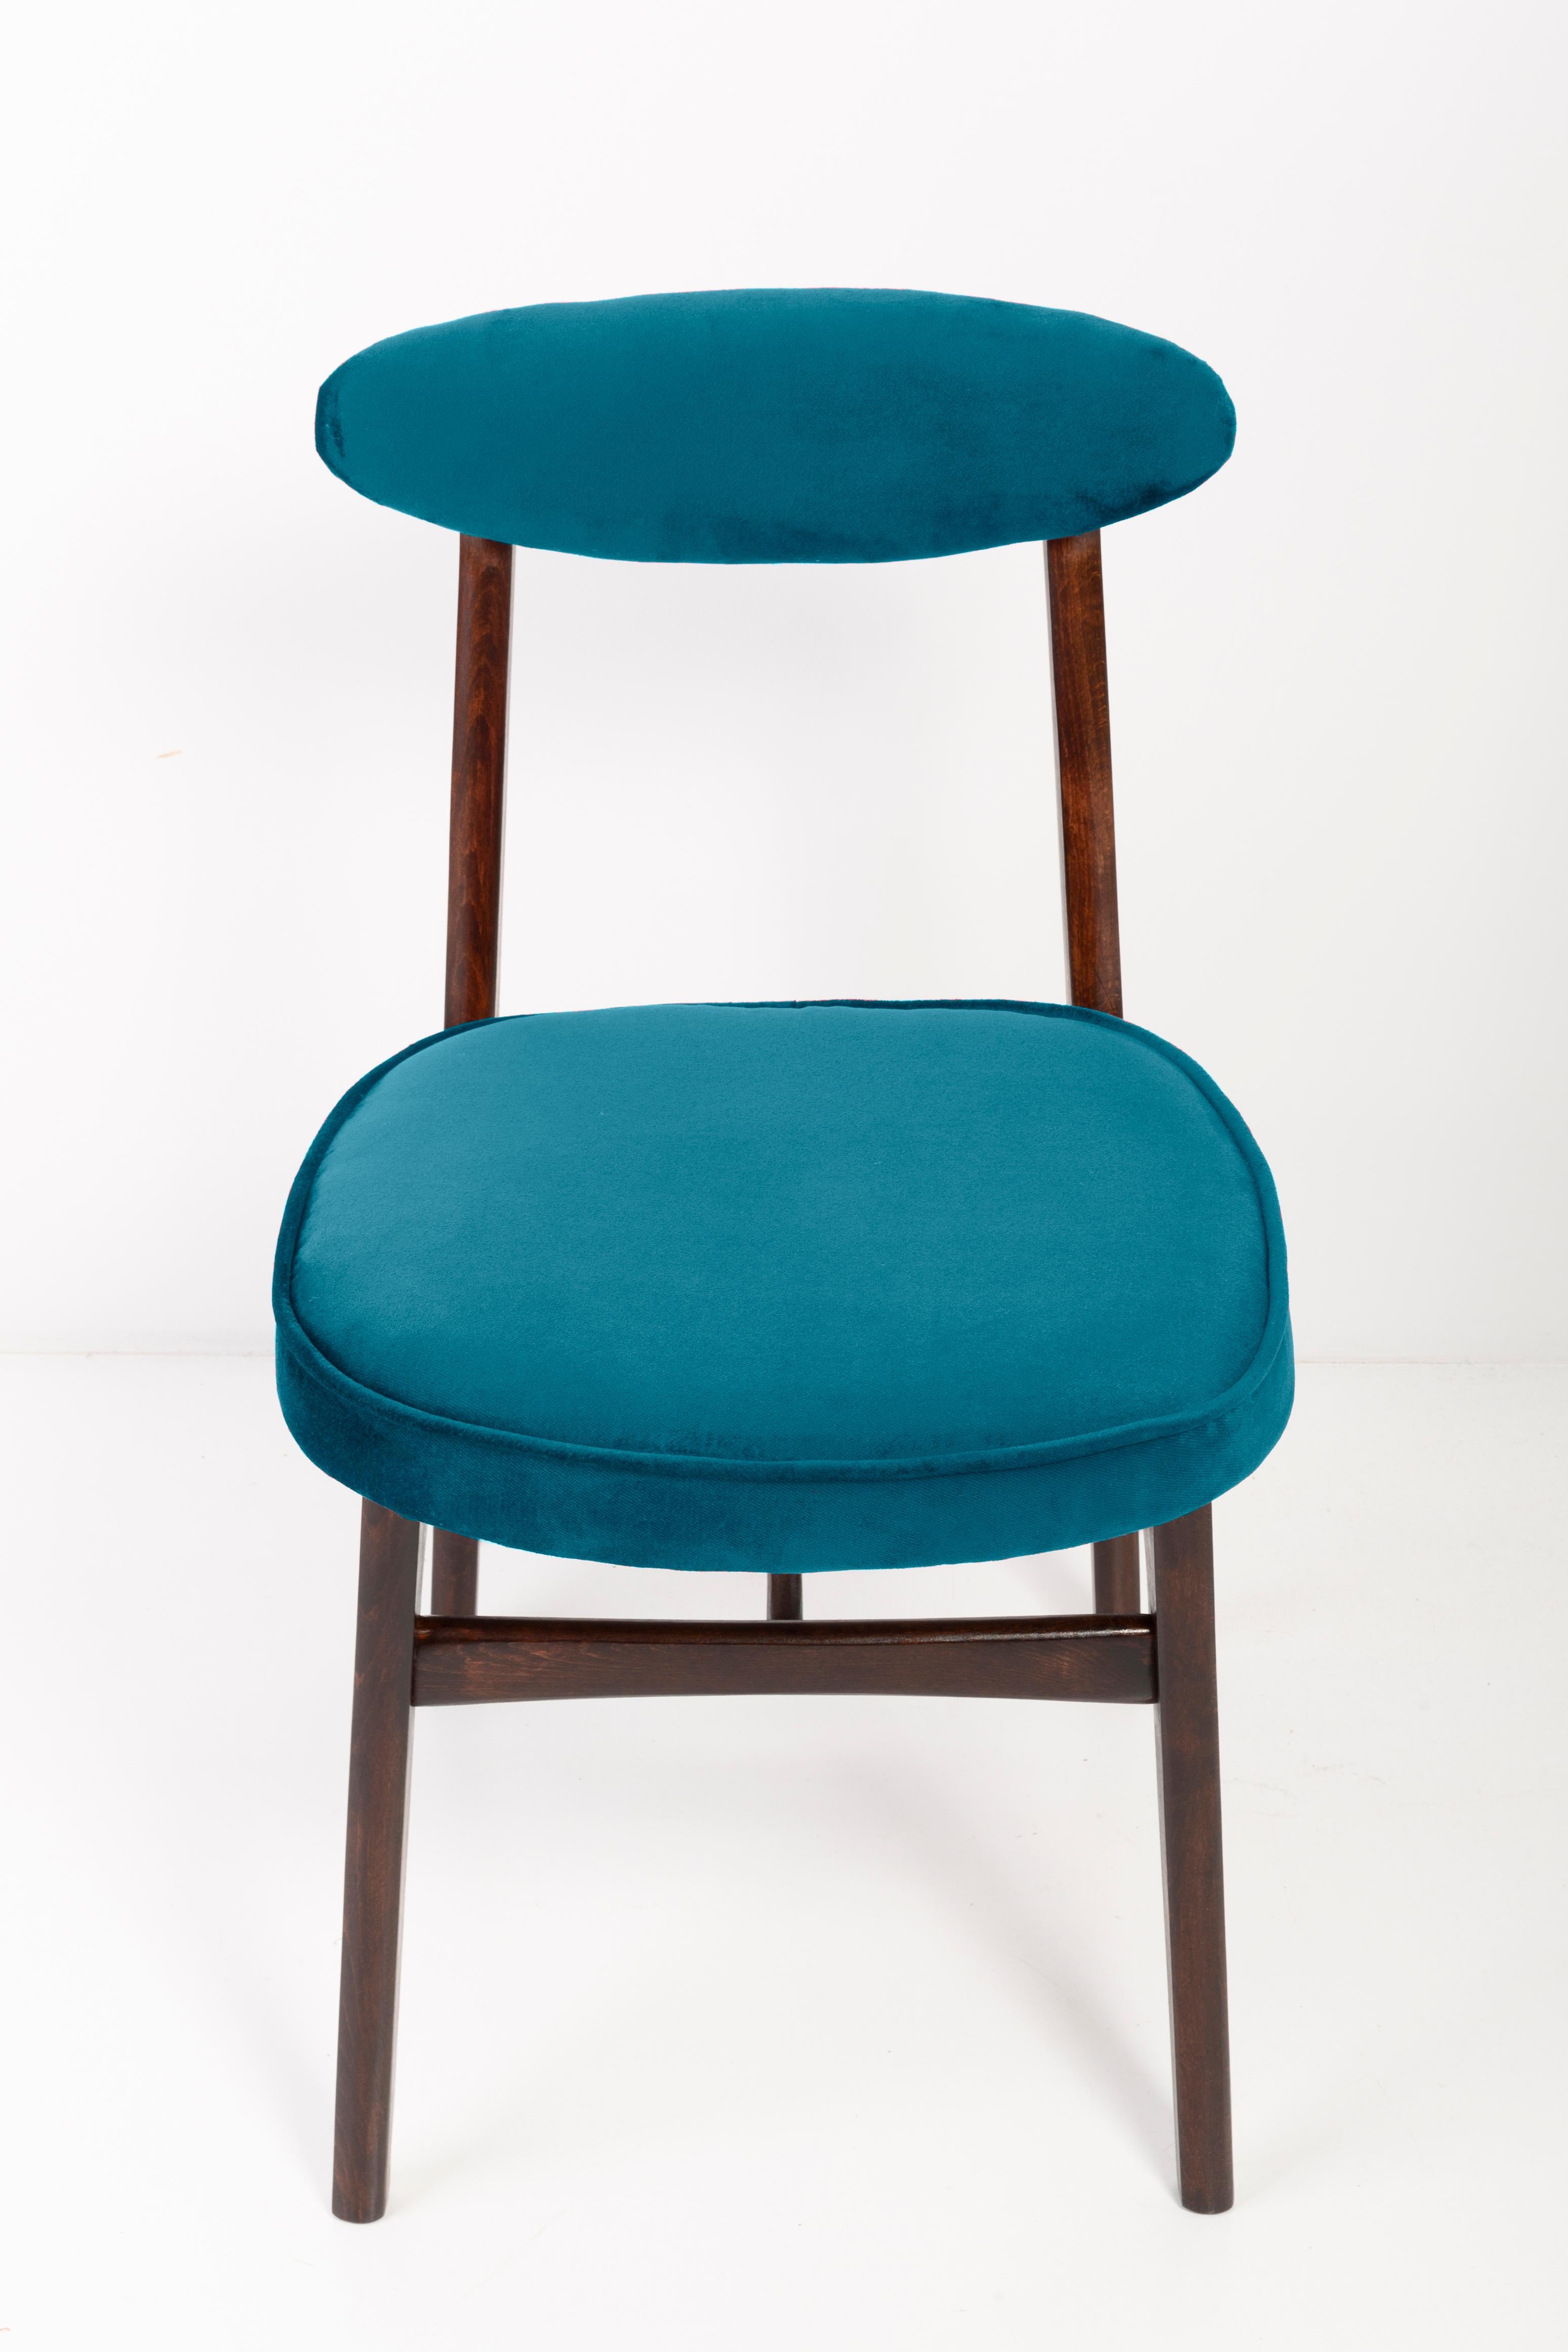 Hand-Crafted Six 20th Century Petrol Blue Velvet Chairs by Rajmund Halas, Europe, 1960s For Sale